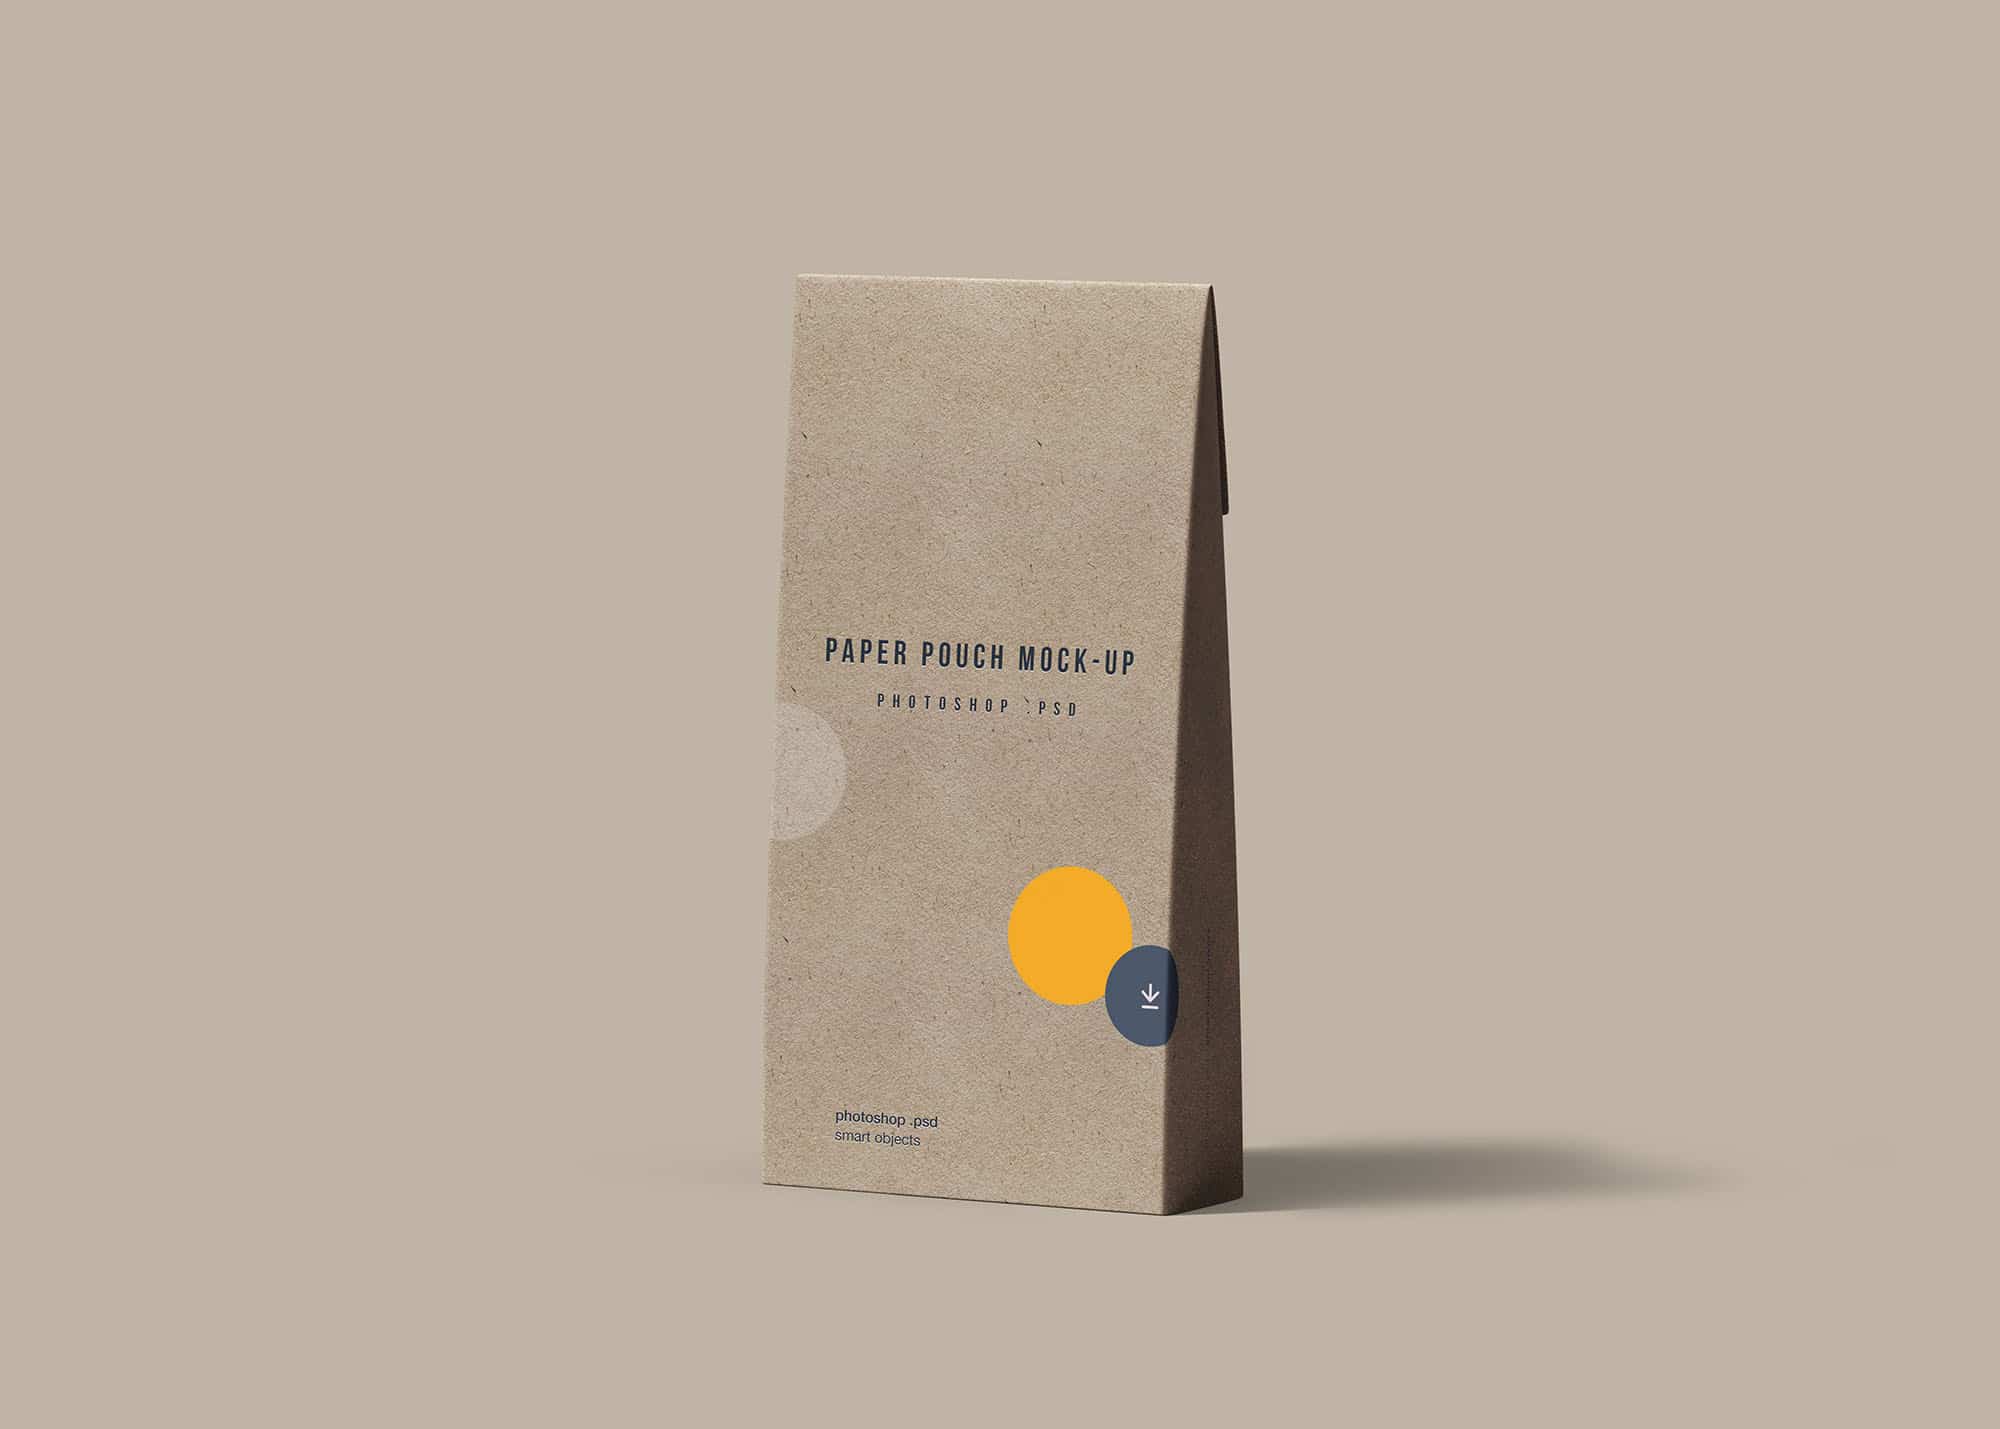 Paper Pouch Mockup Download for Free in PSD Format | DesignHooks